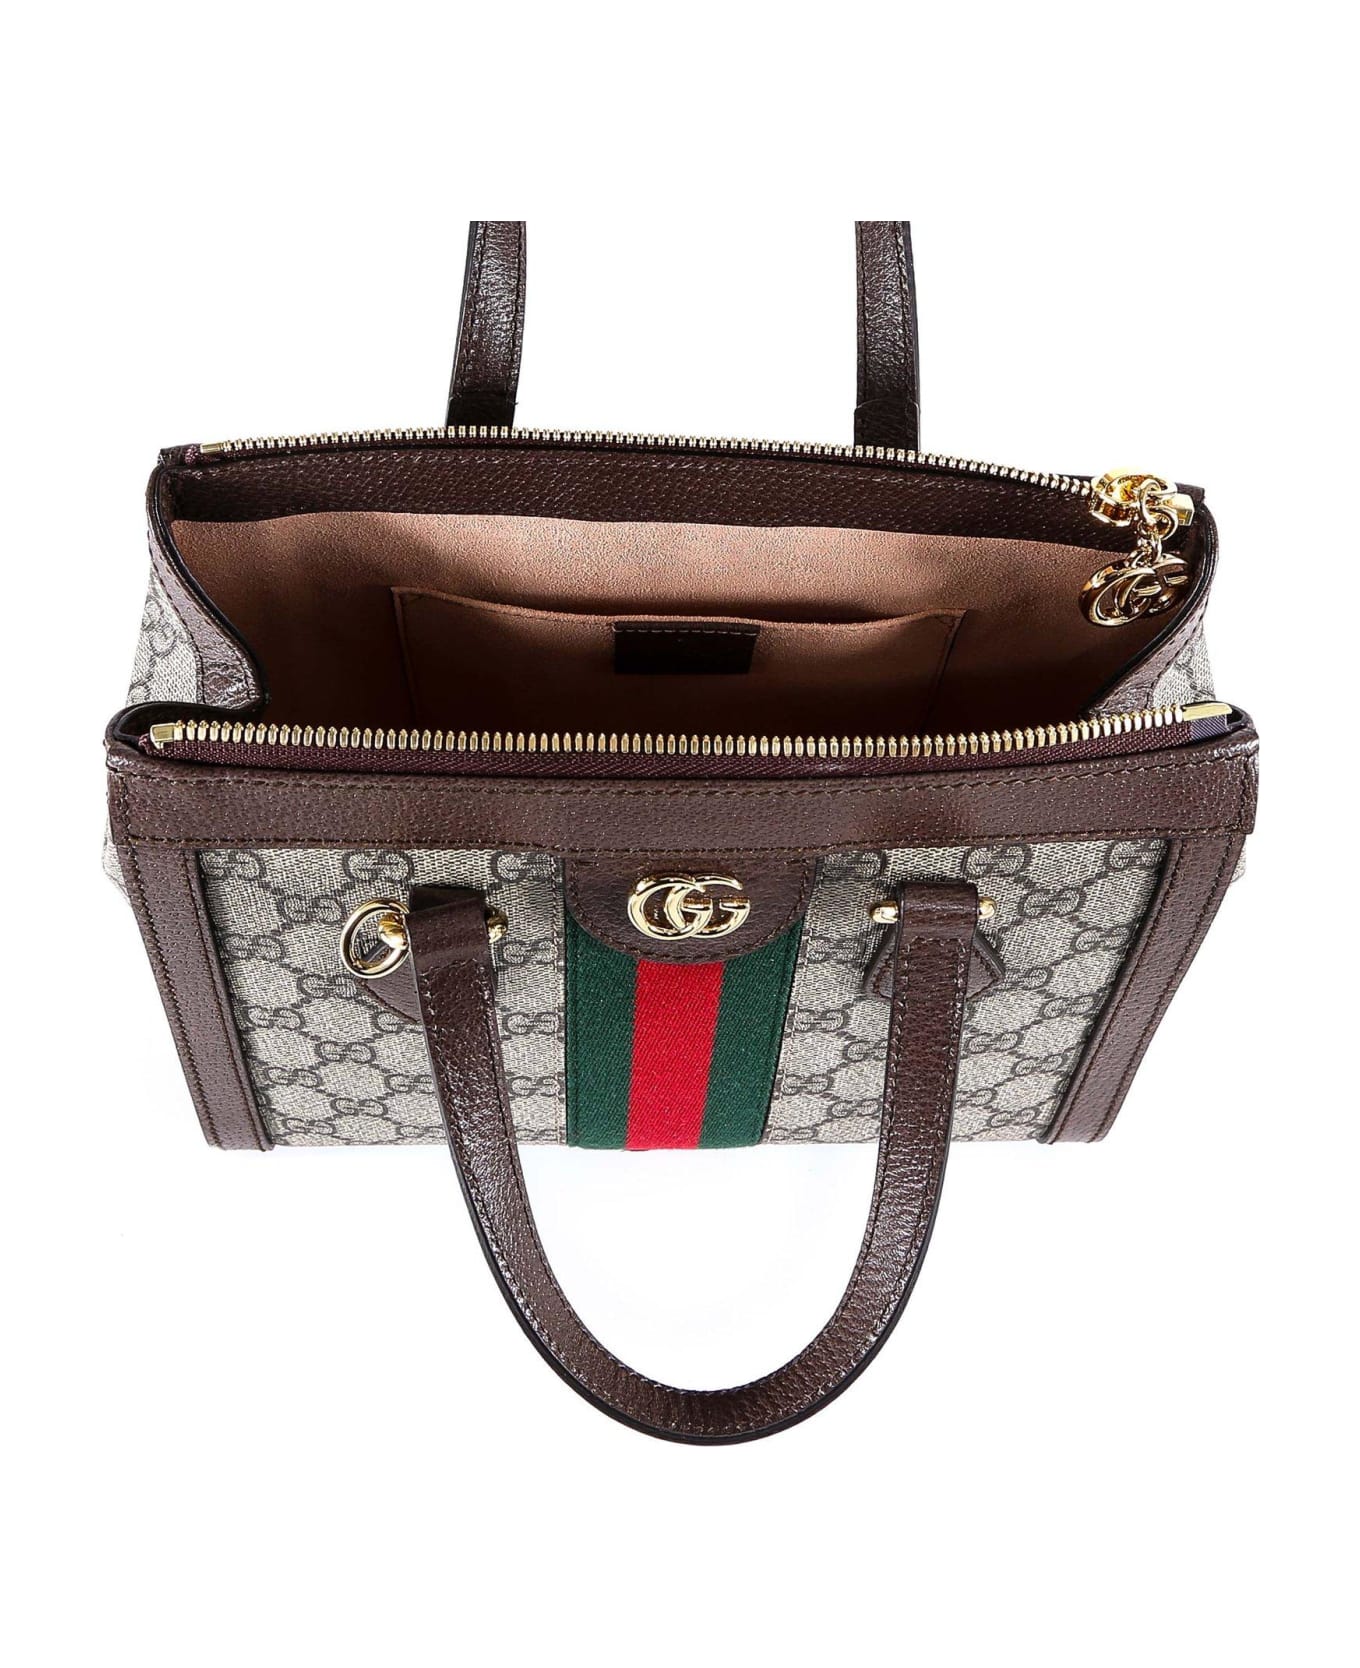 Gucci Ophidia Small Gg Tote Bag - Acero トートバッグ